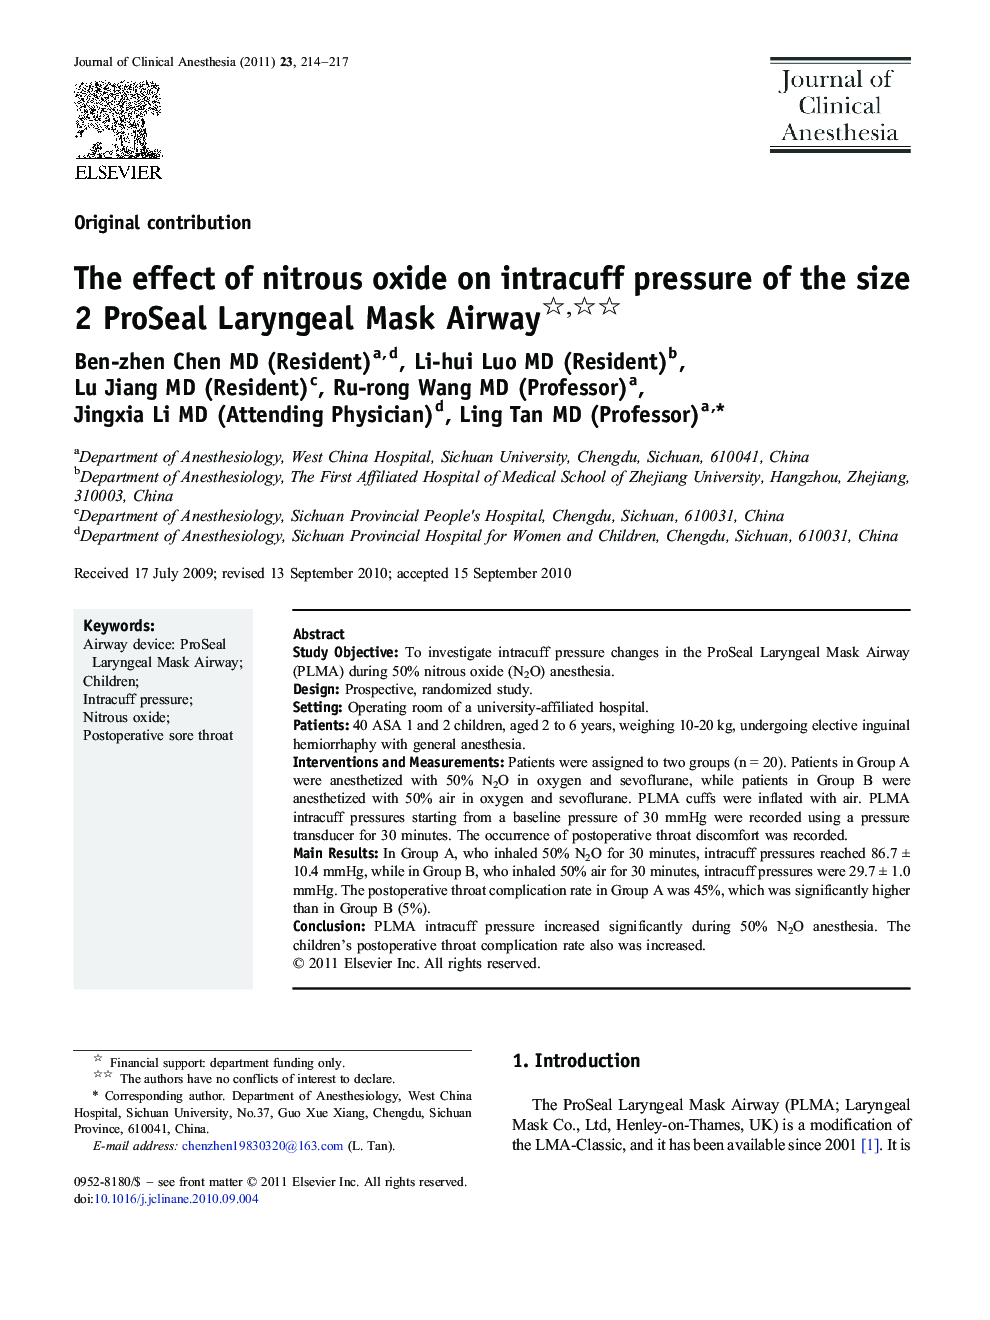 The effect of nitrous oxide on intracuff pressure of the size 2 ProSeal Laryngeal Mask Airway 